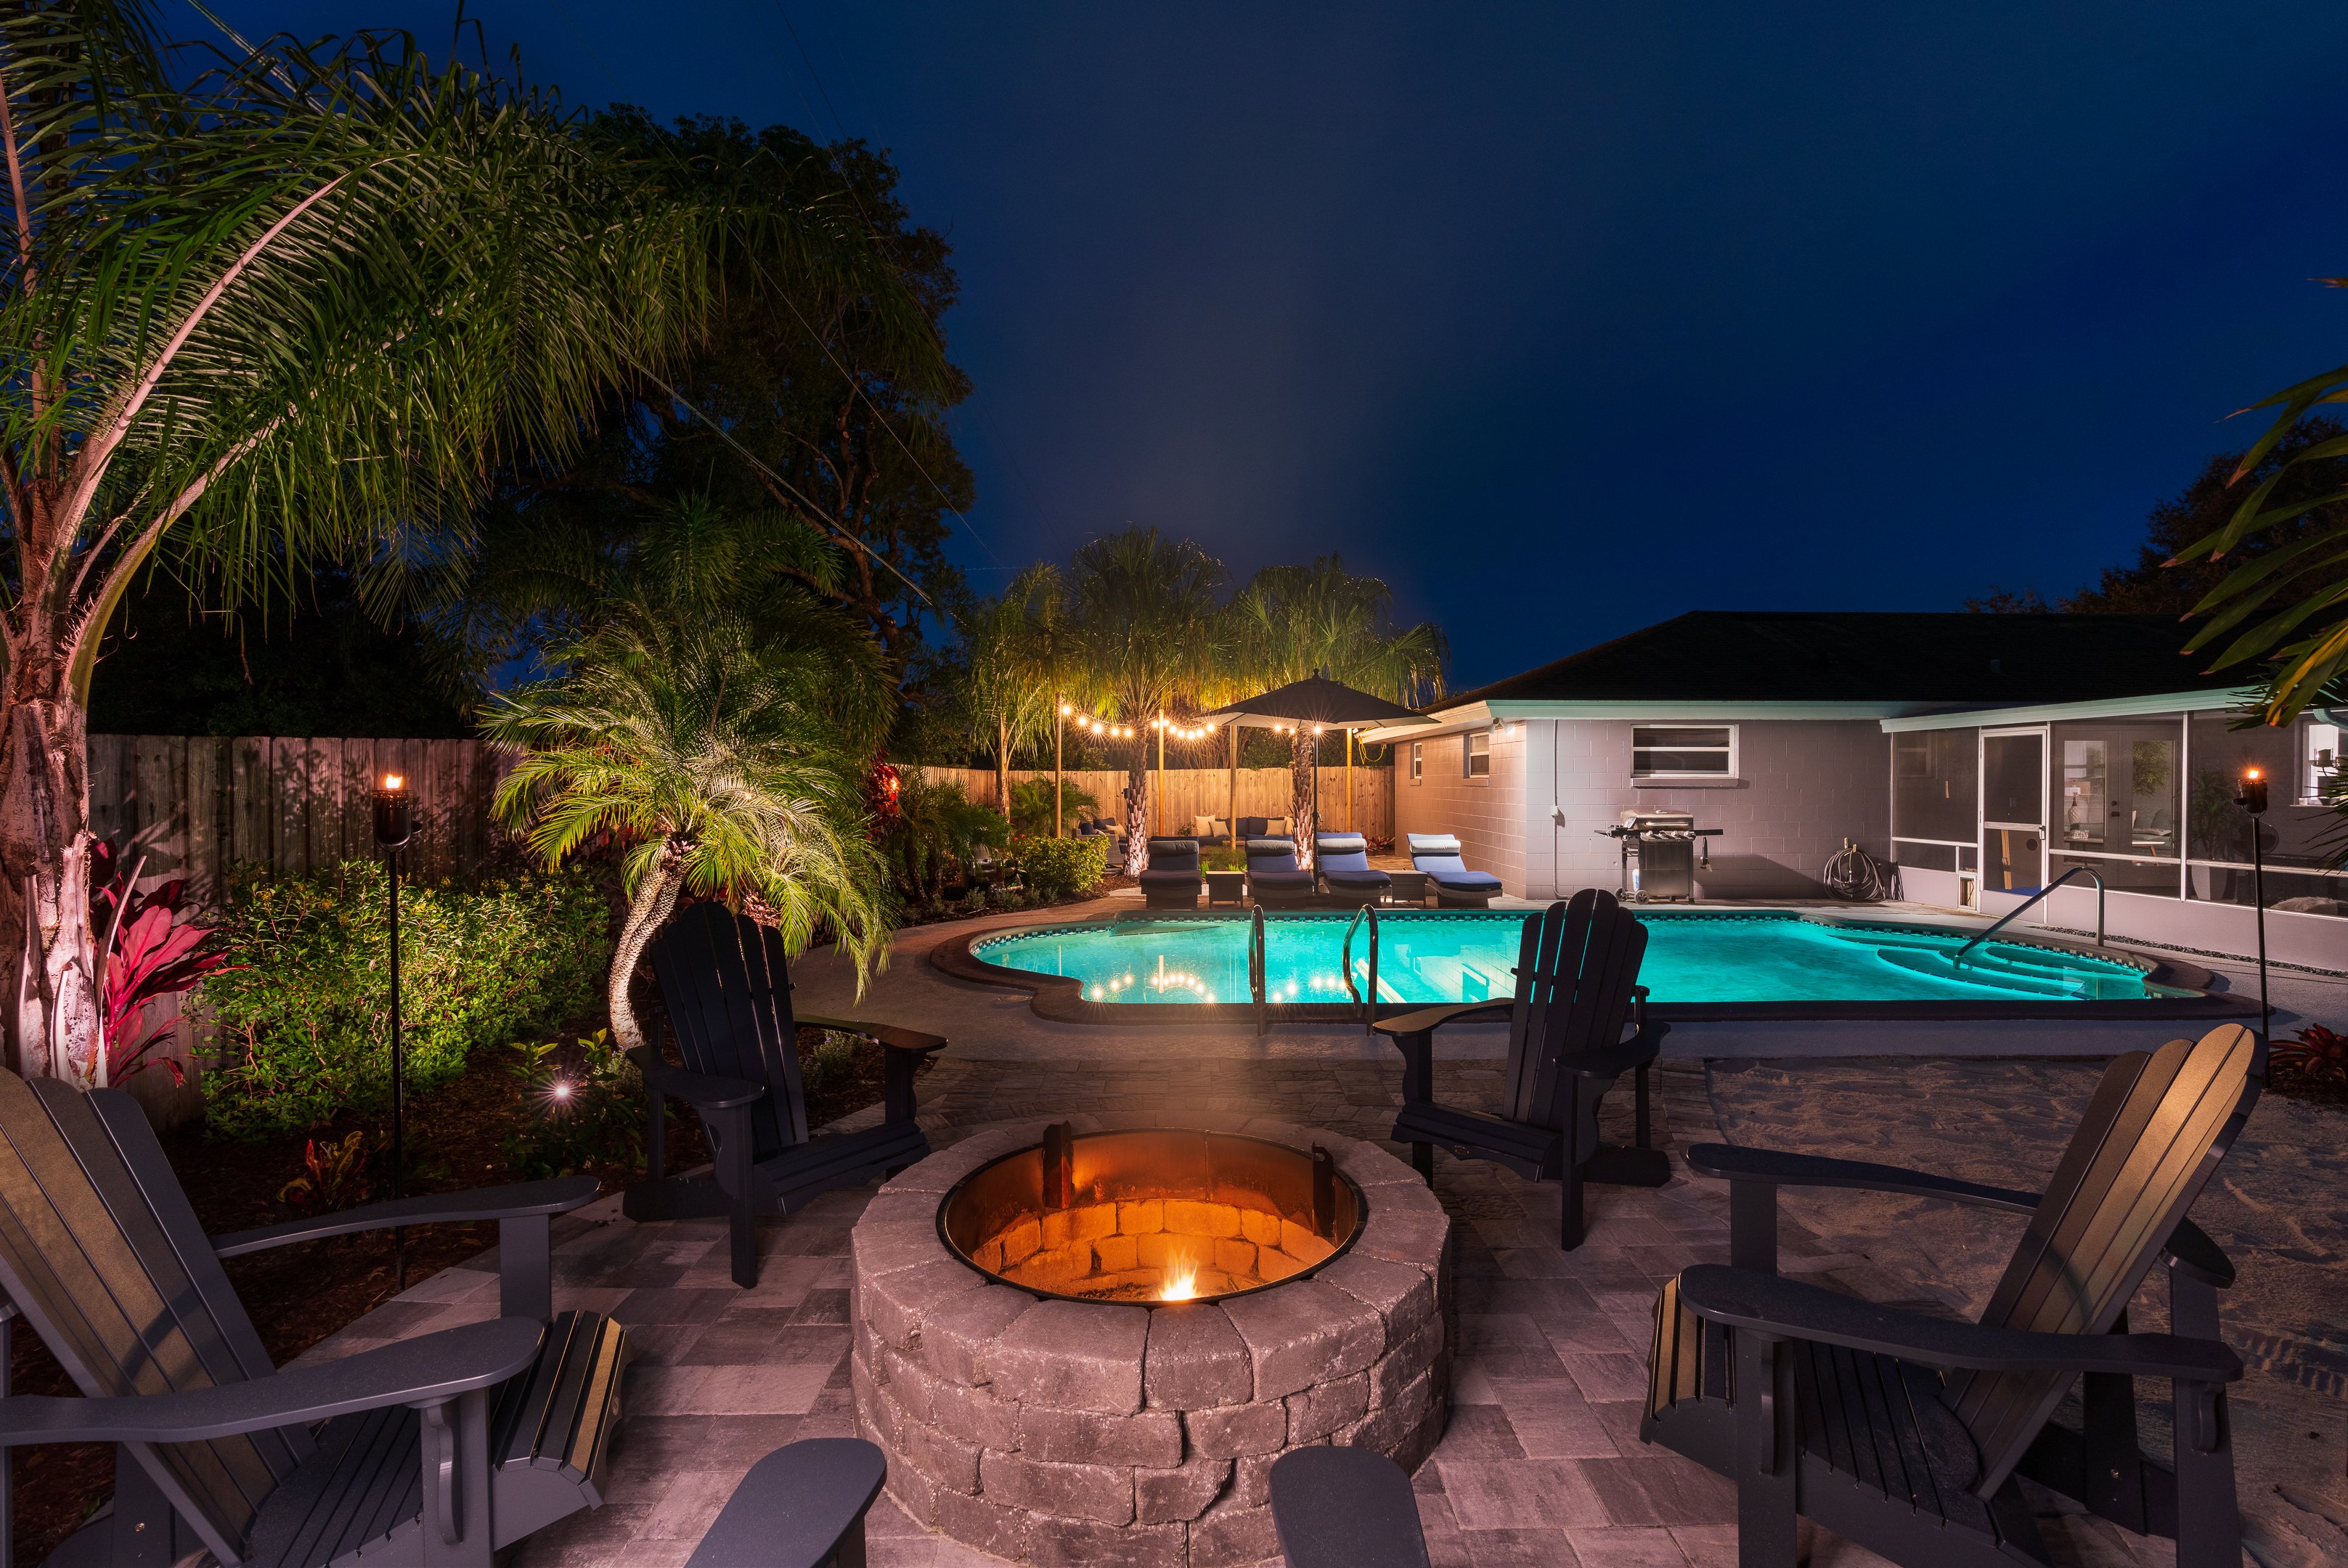 firepit on patio with pool